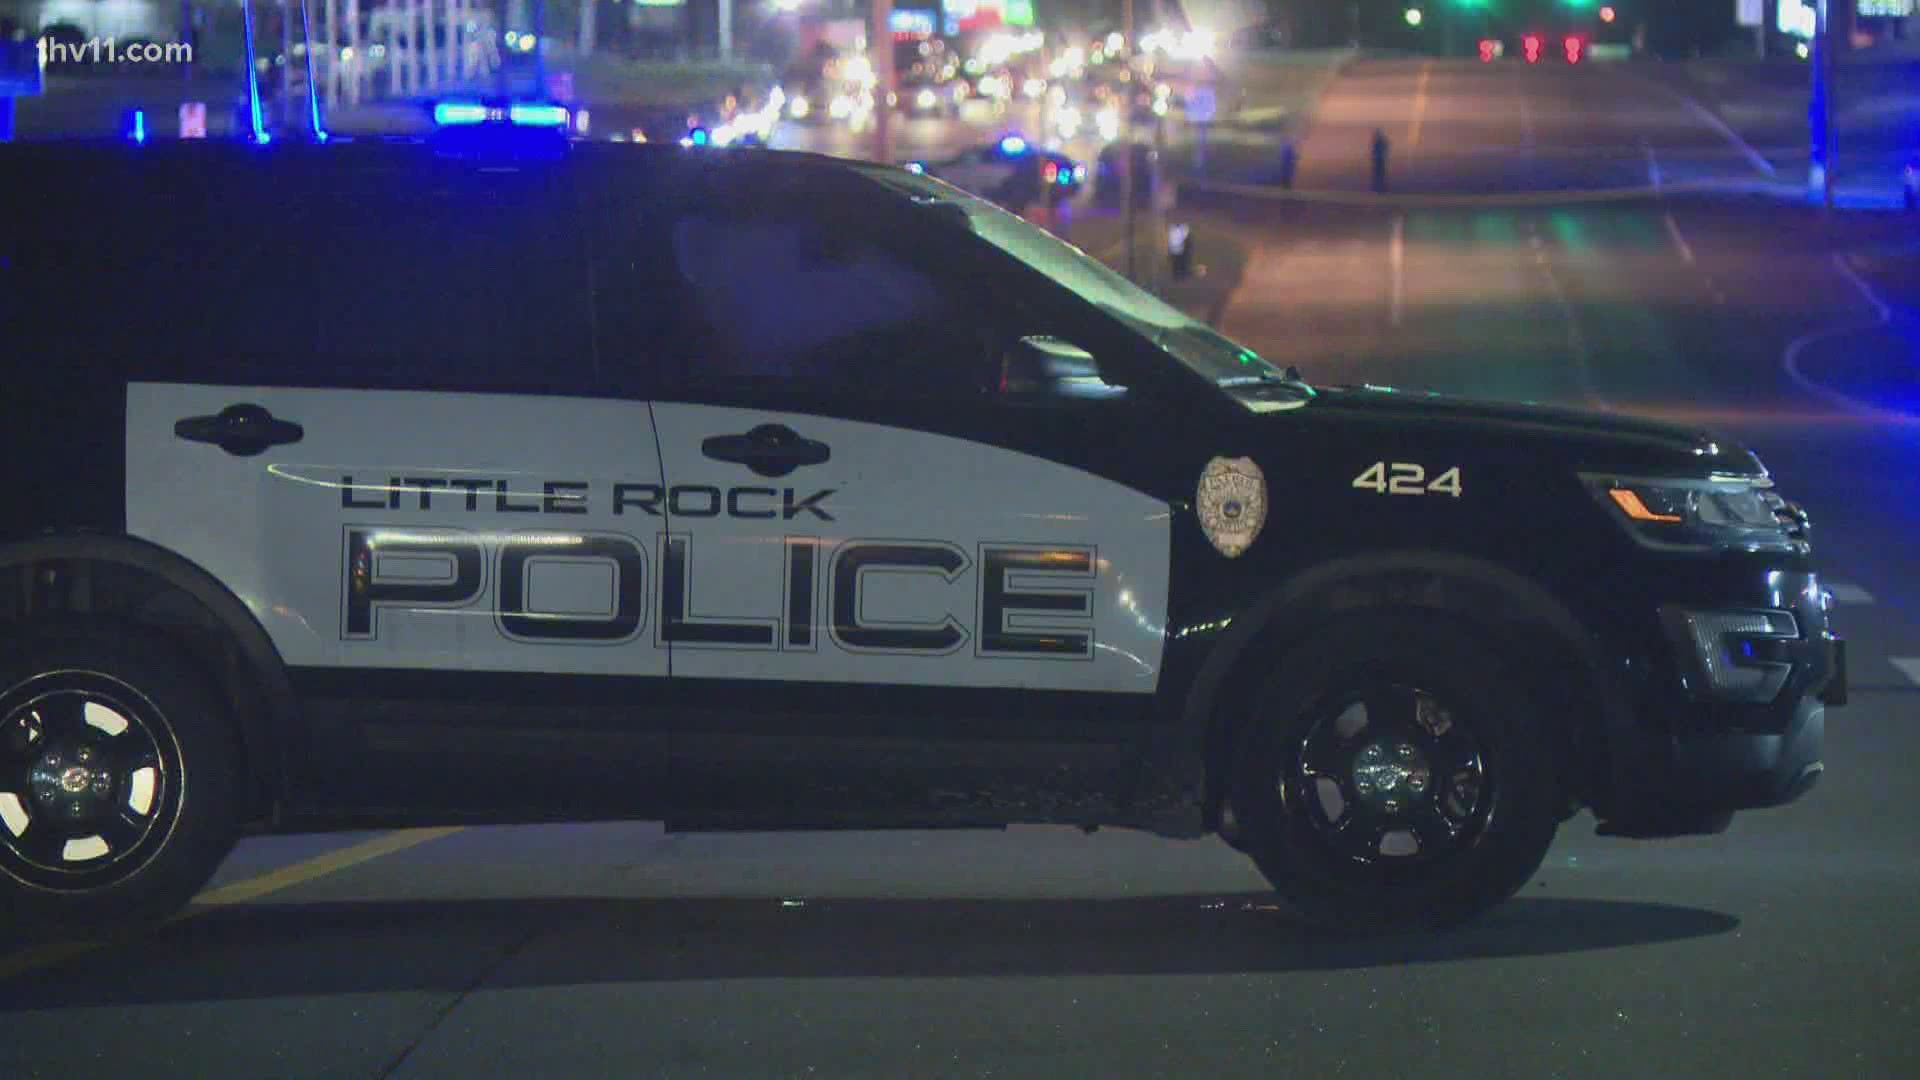 Little Rock Police are investigating a late night shooting in multiple locations that left at least one person dead.